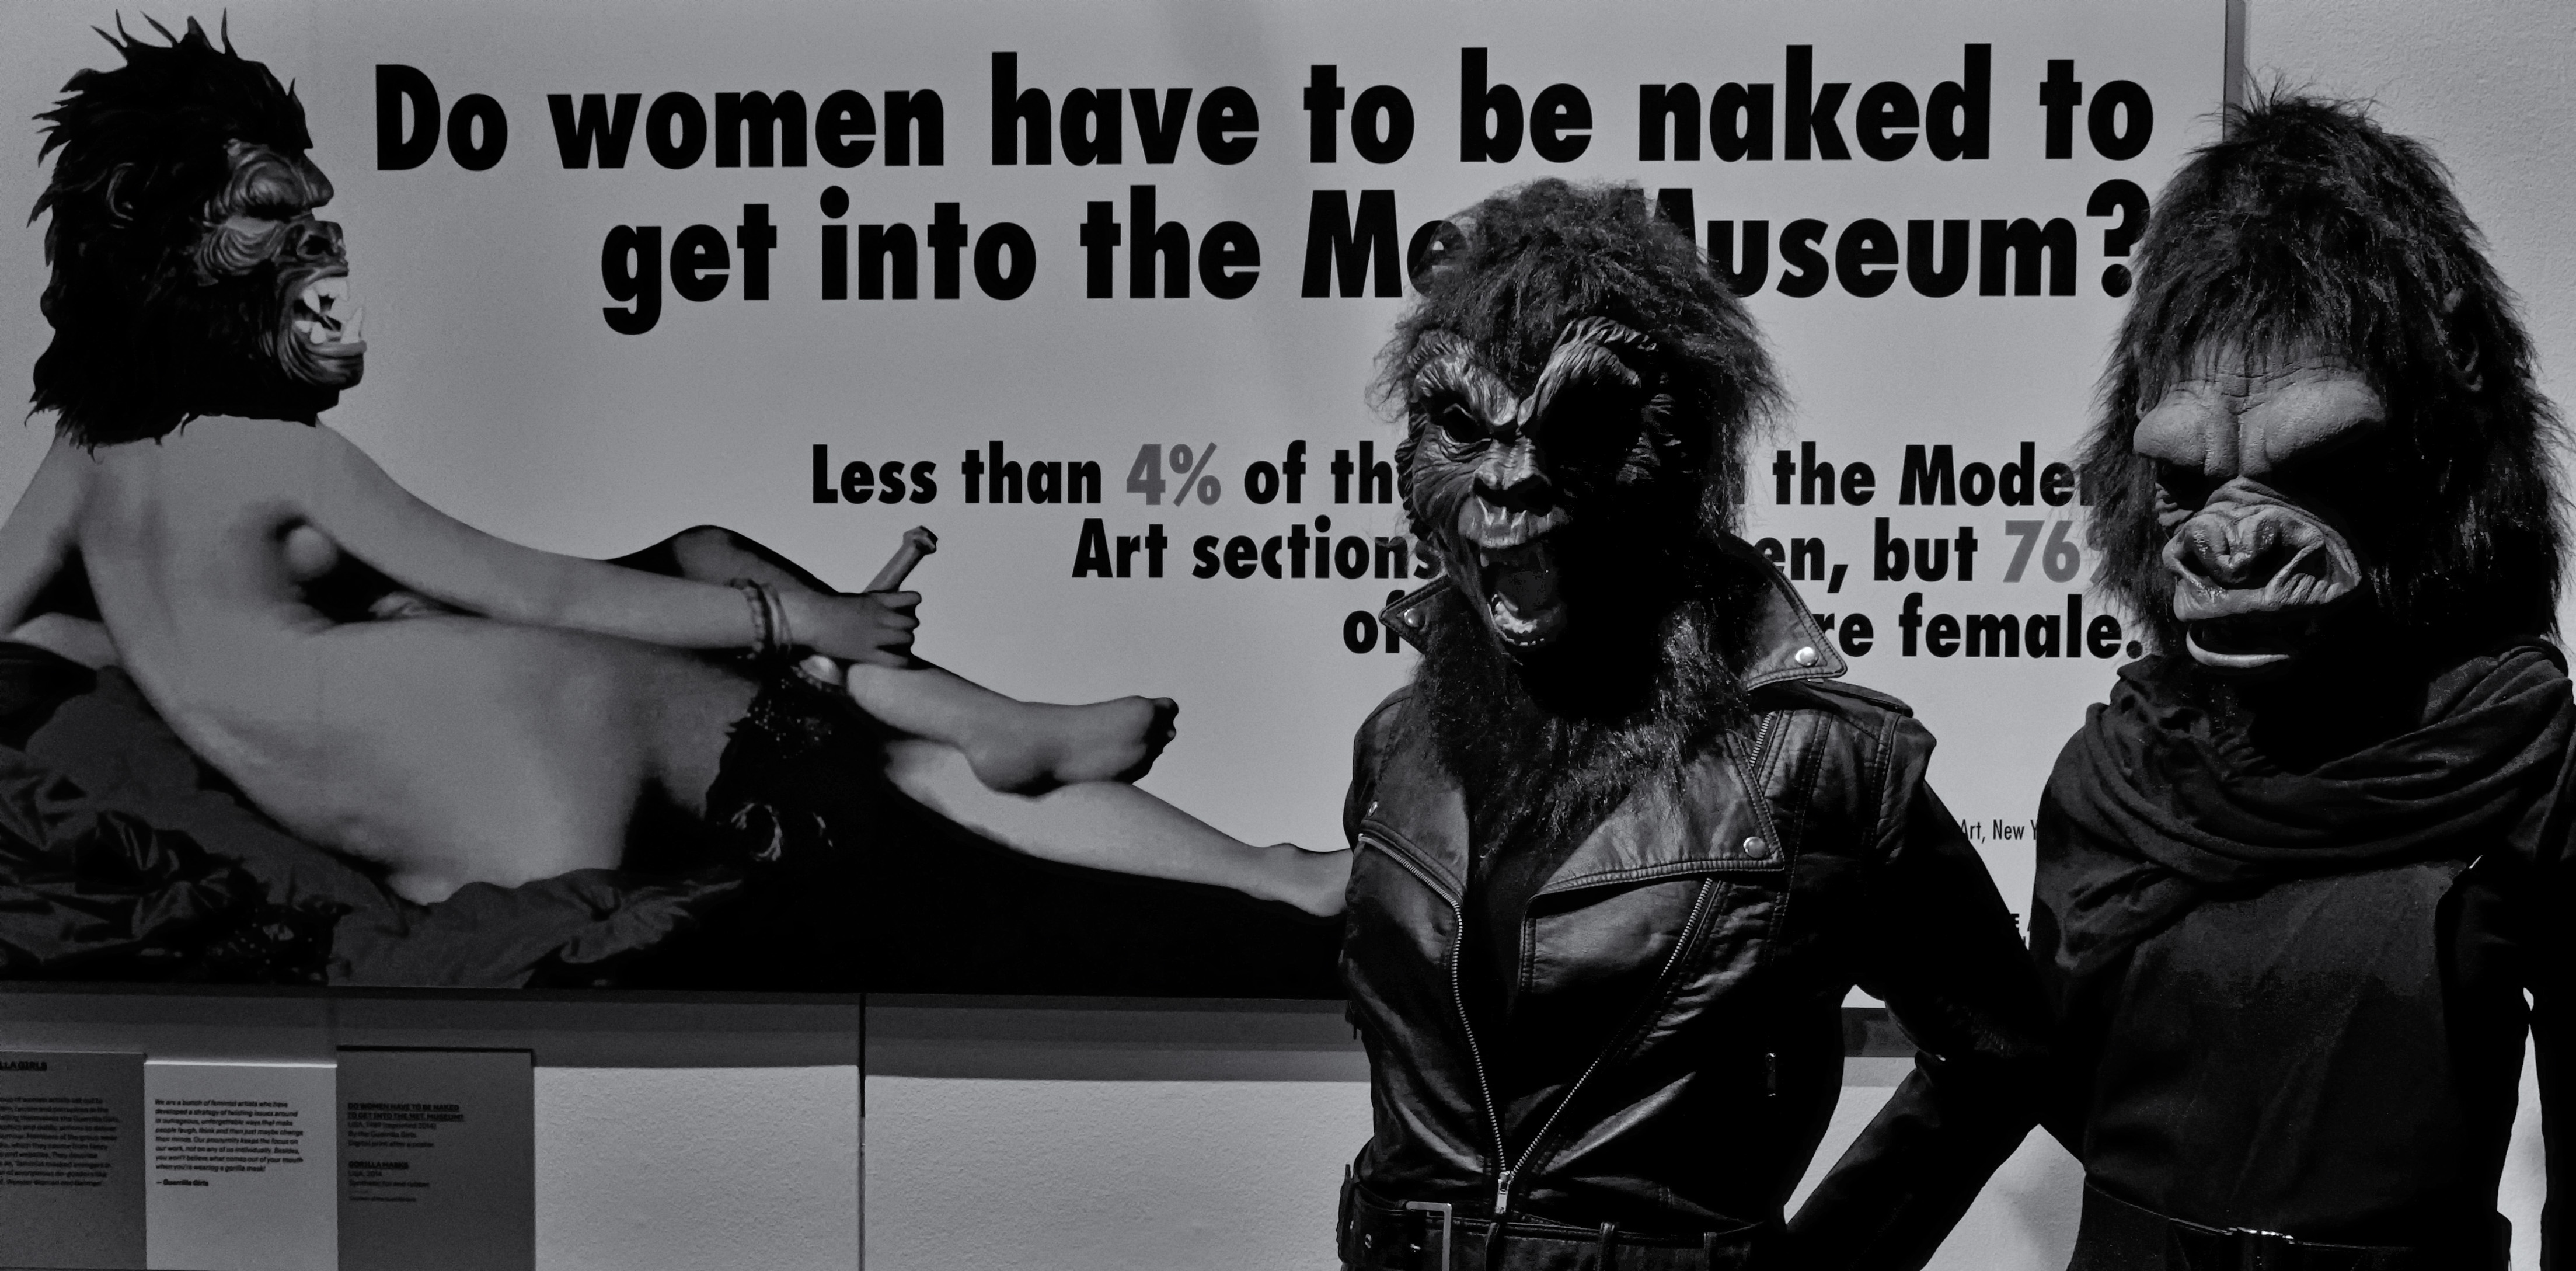 Fig. 10. Guerrilla girls, “Do women have to be naked to get into the Met. Museum?”, 1989 [foto Eric Huybrechts, CC BY-SA 2.0, via Wikimedia Commons].